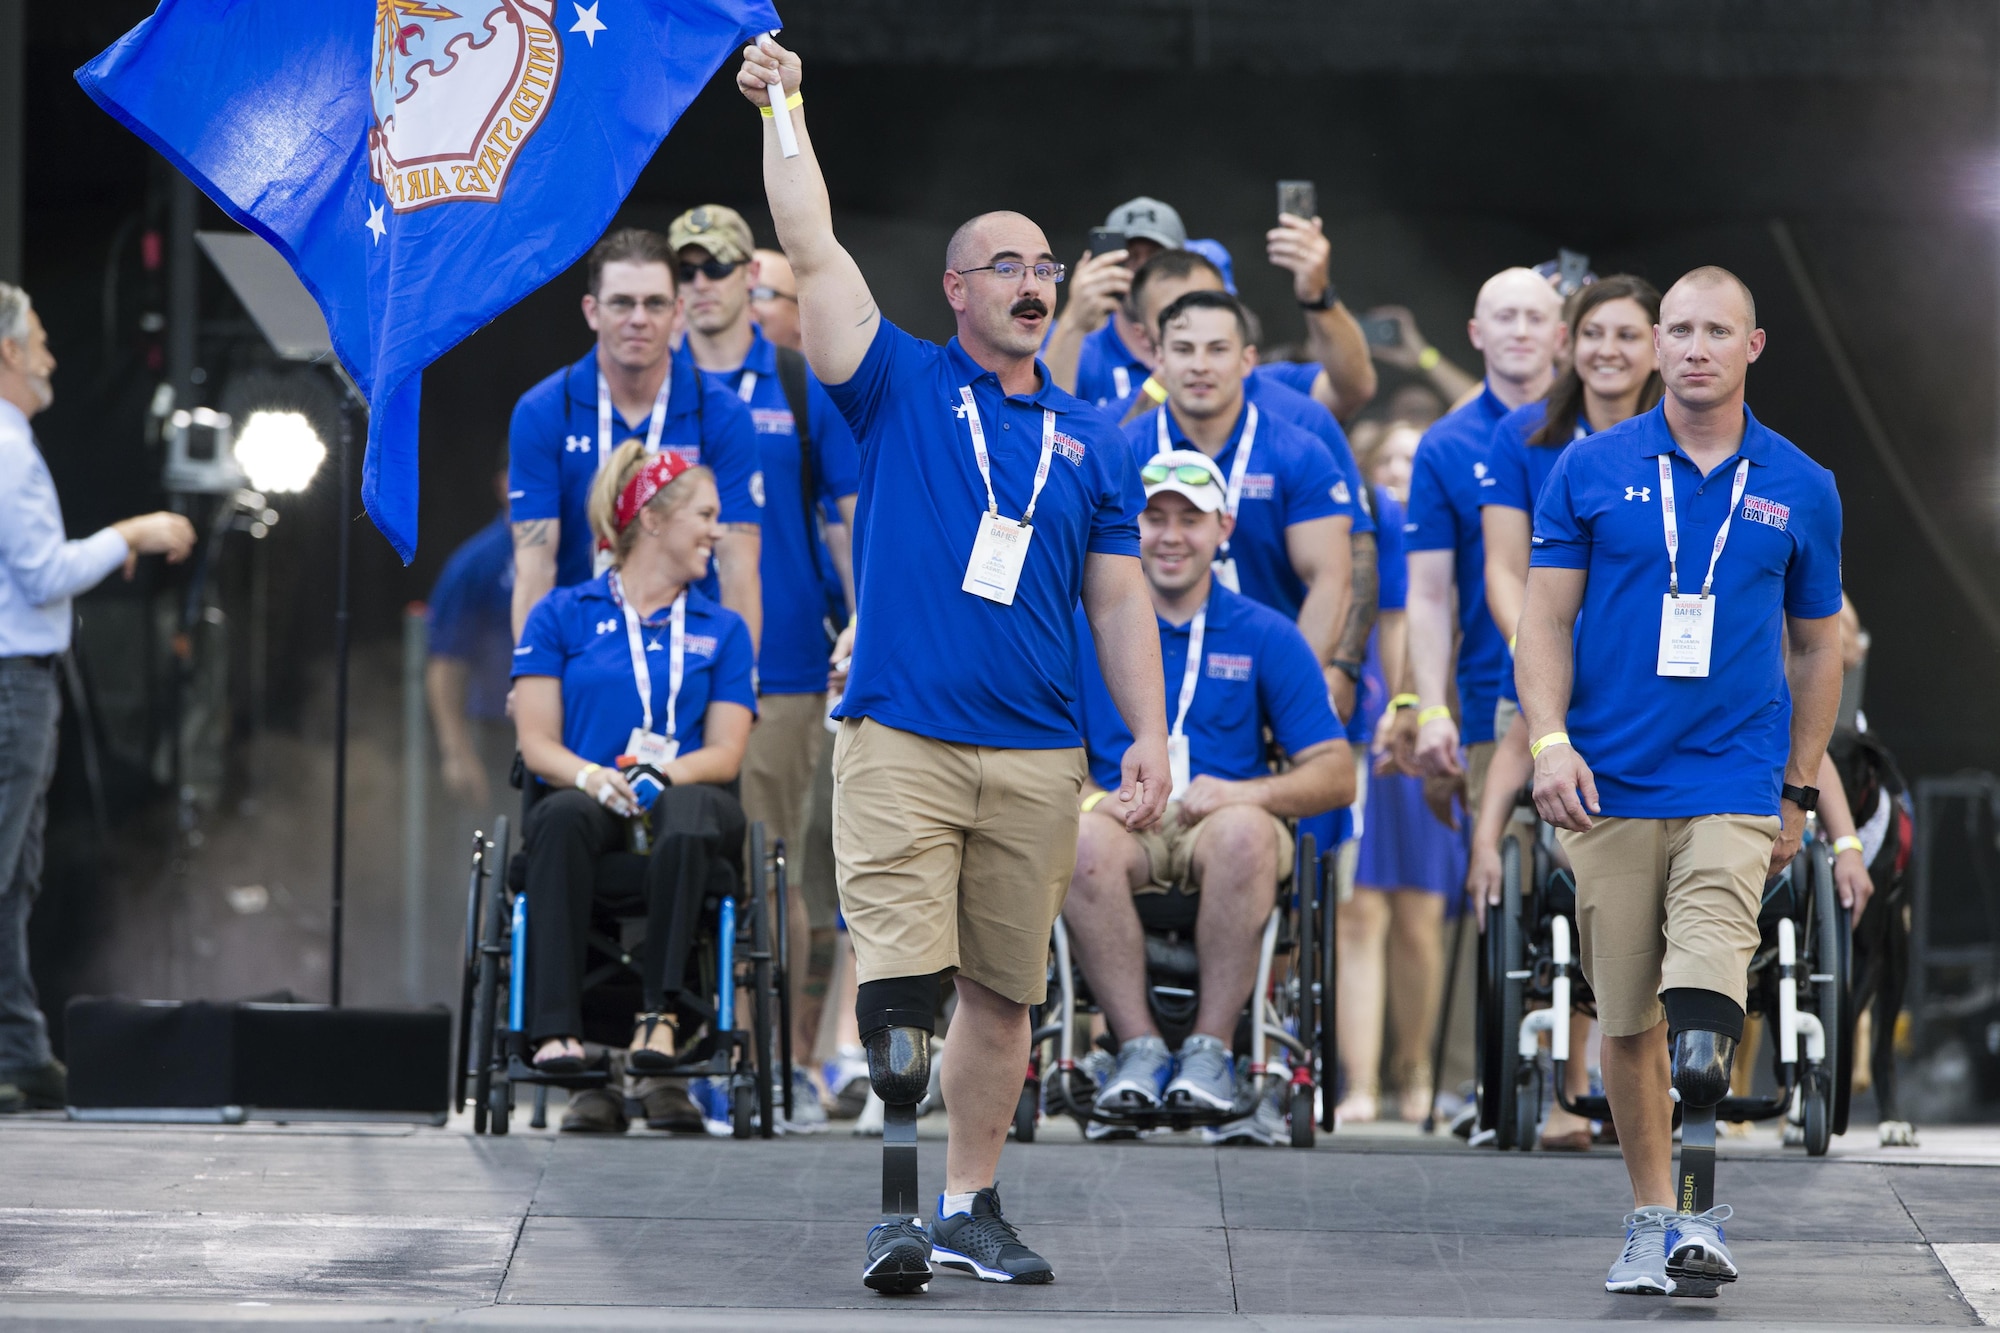 Team Air Force enters opening ceremonies for the 2017 Department of Defense Warrior Games at Soldier Field in Chicago, July 1, 2017. The DOD Warrior Games are an annual event allowing wounded, ill and injured service members and veterans to compete in Paralympic-style sports. (DOD photo/EJ Hersom)